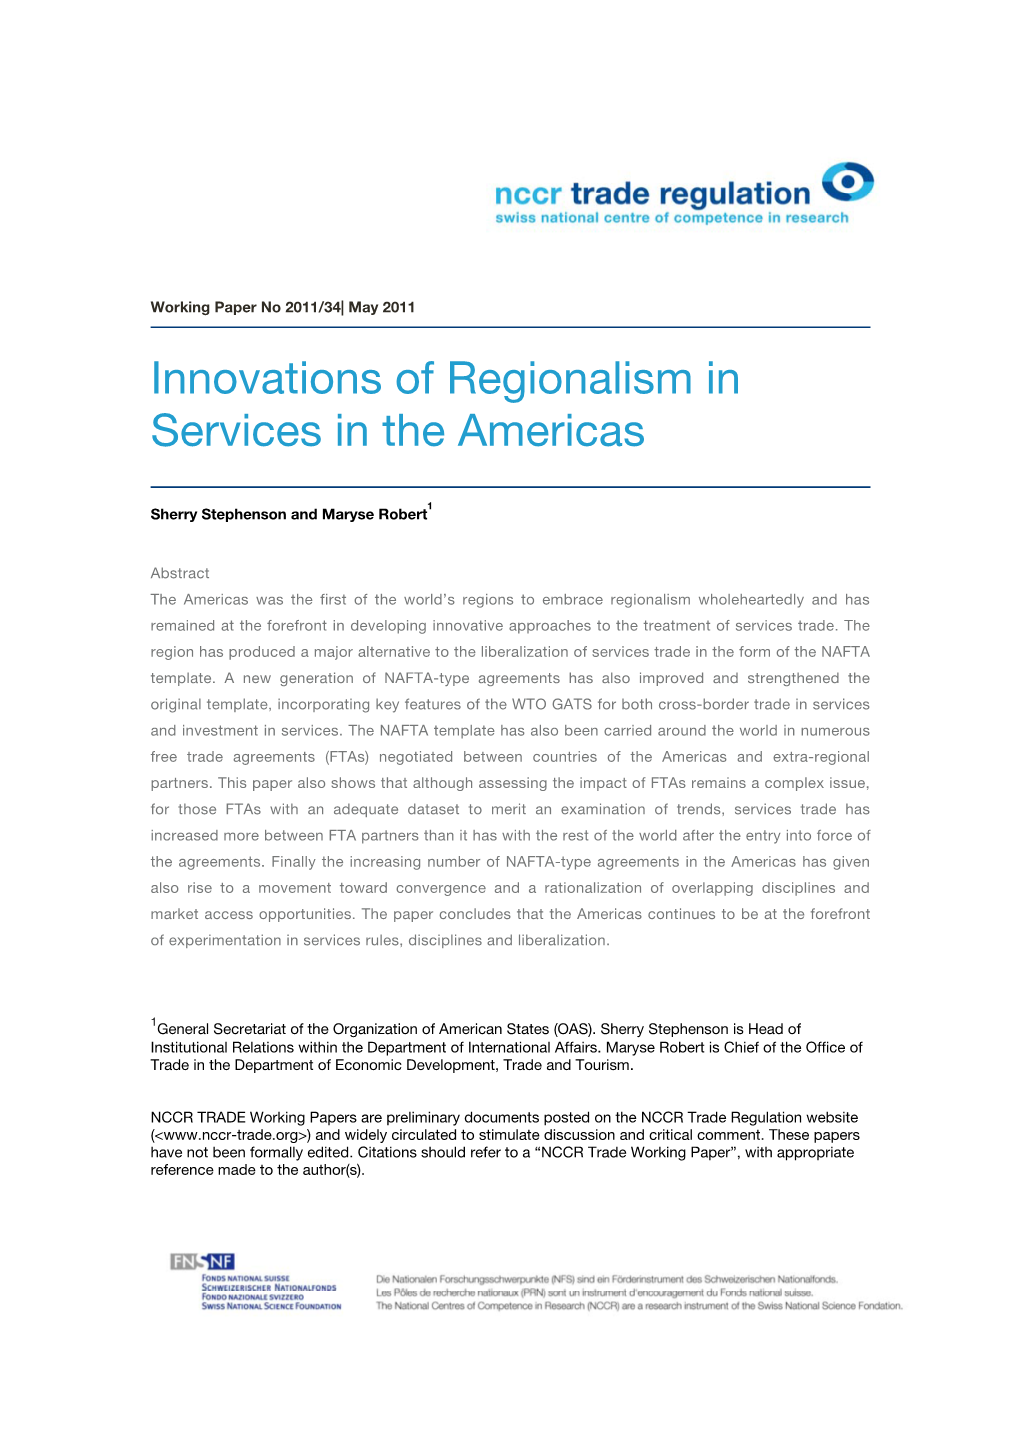 Innovations of Regionalism in Services in the Americas